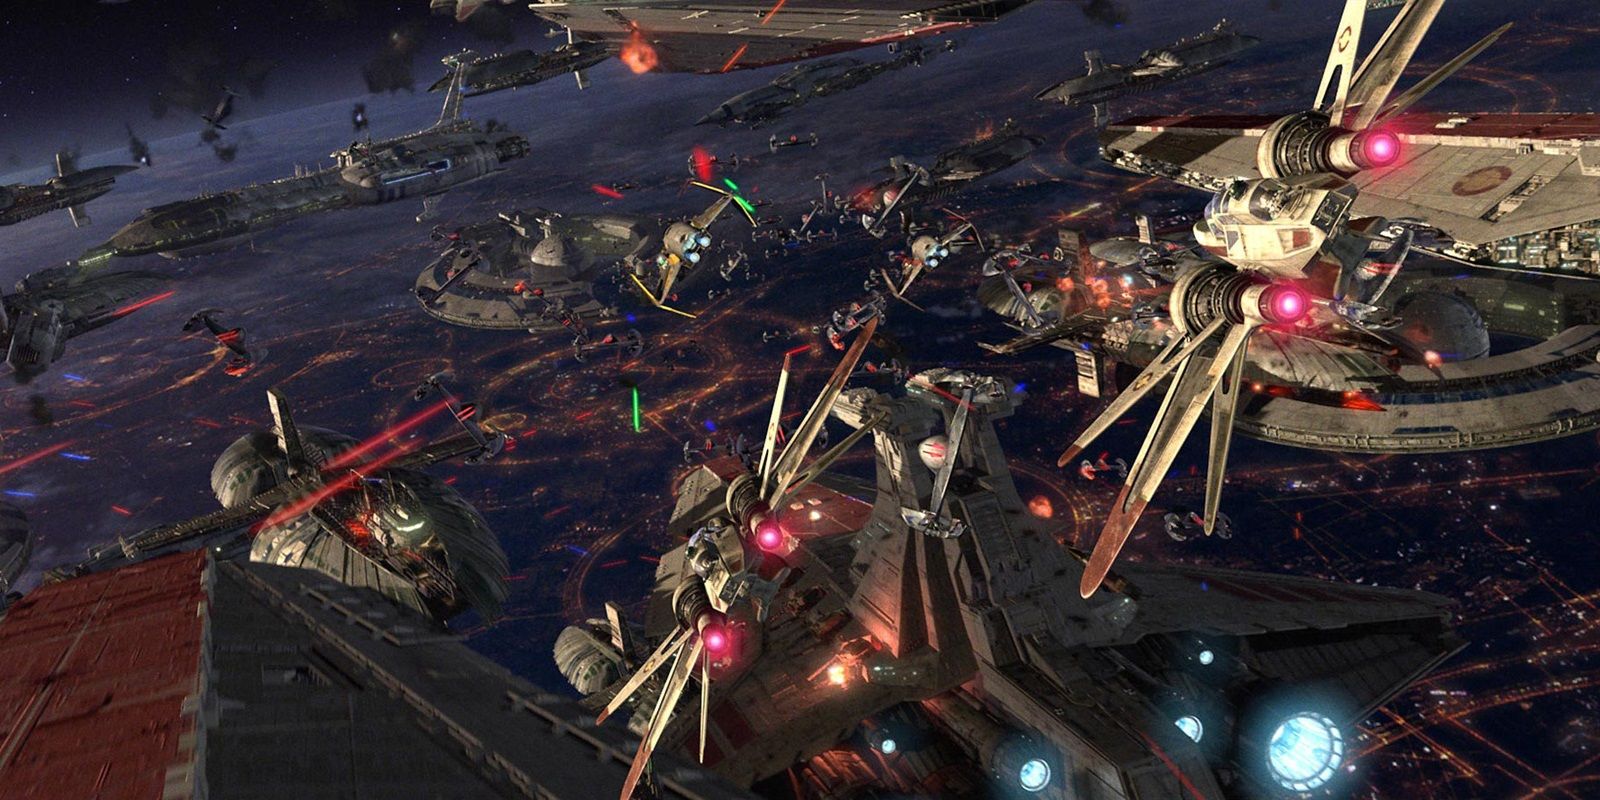 15 Reasons The Star Wars Prequels Are Actually Great